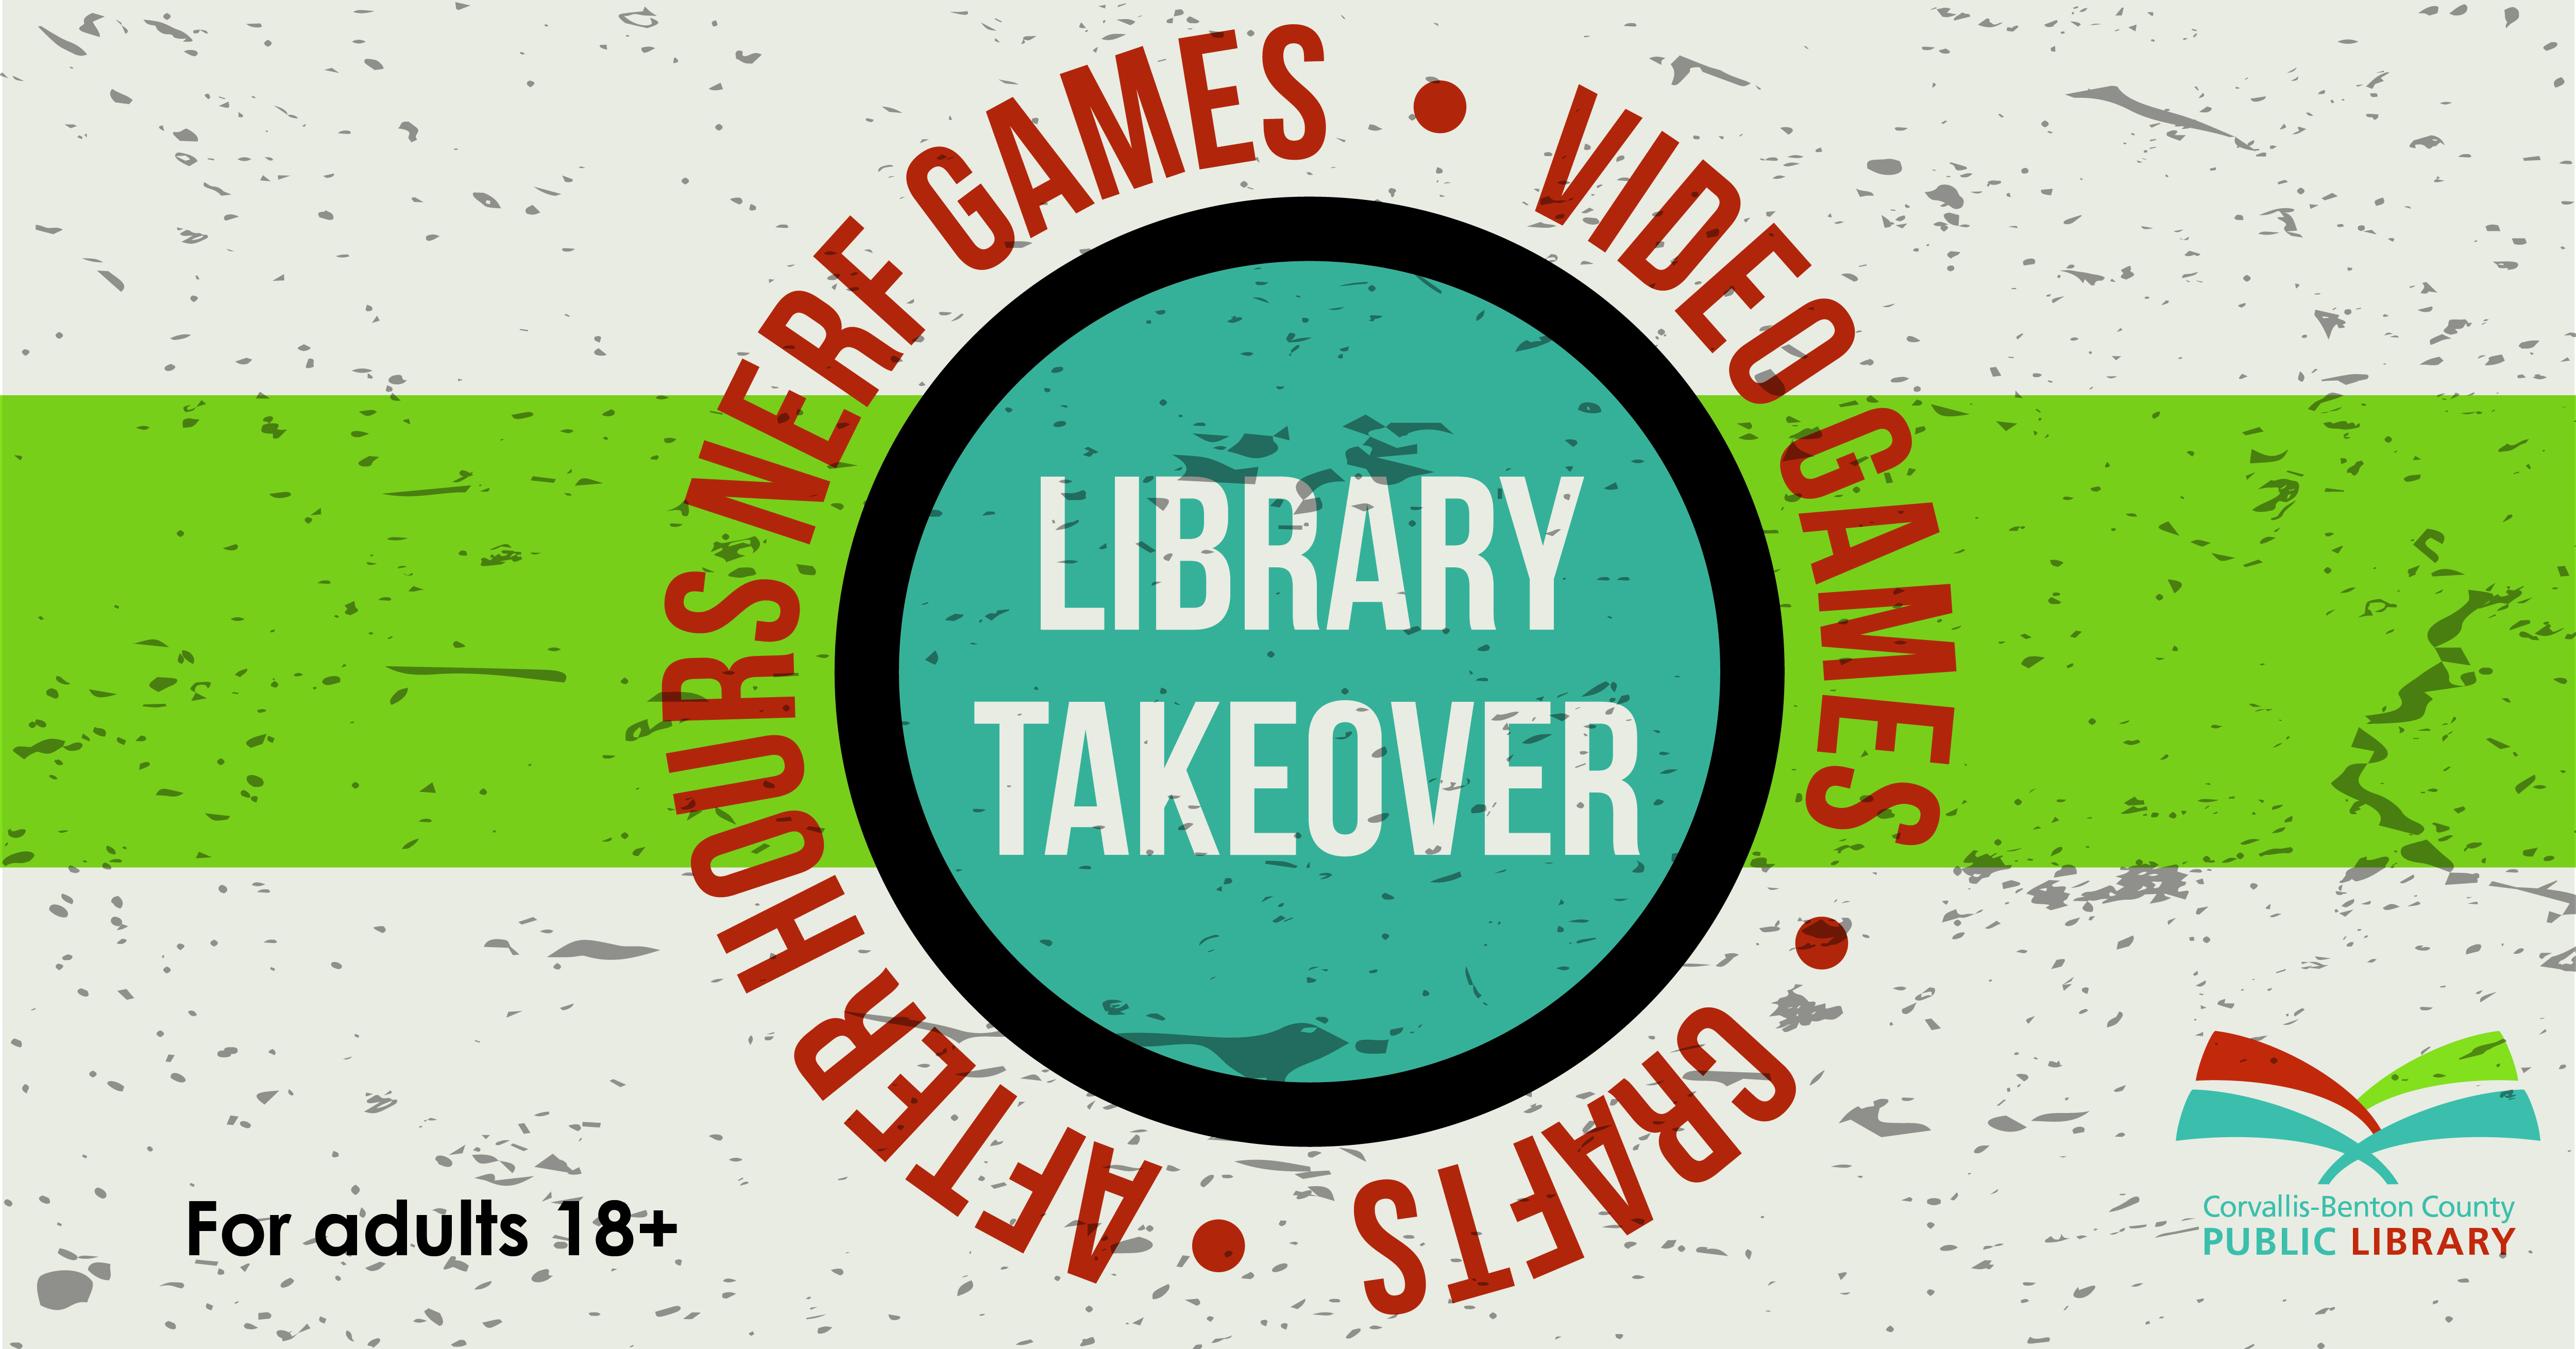 Text that says "Library Takeover: after hours nerf games, videogames, crafts. For adults 18+"